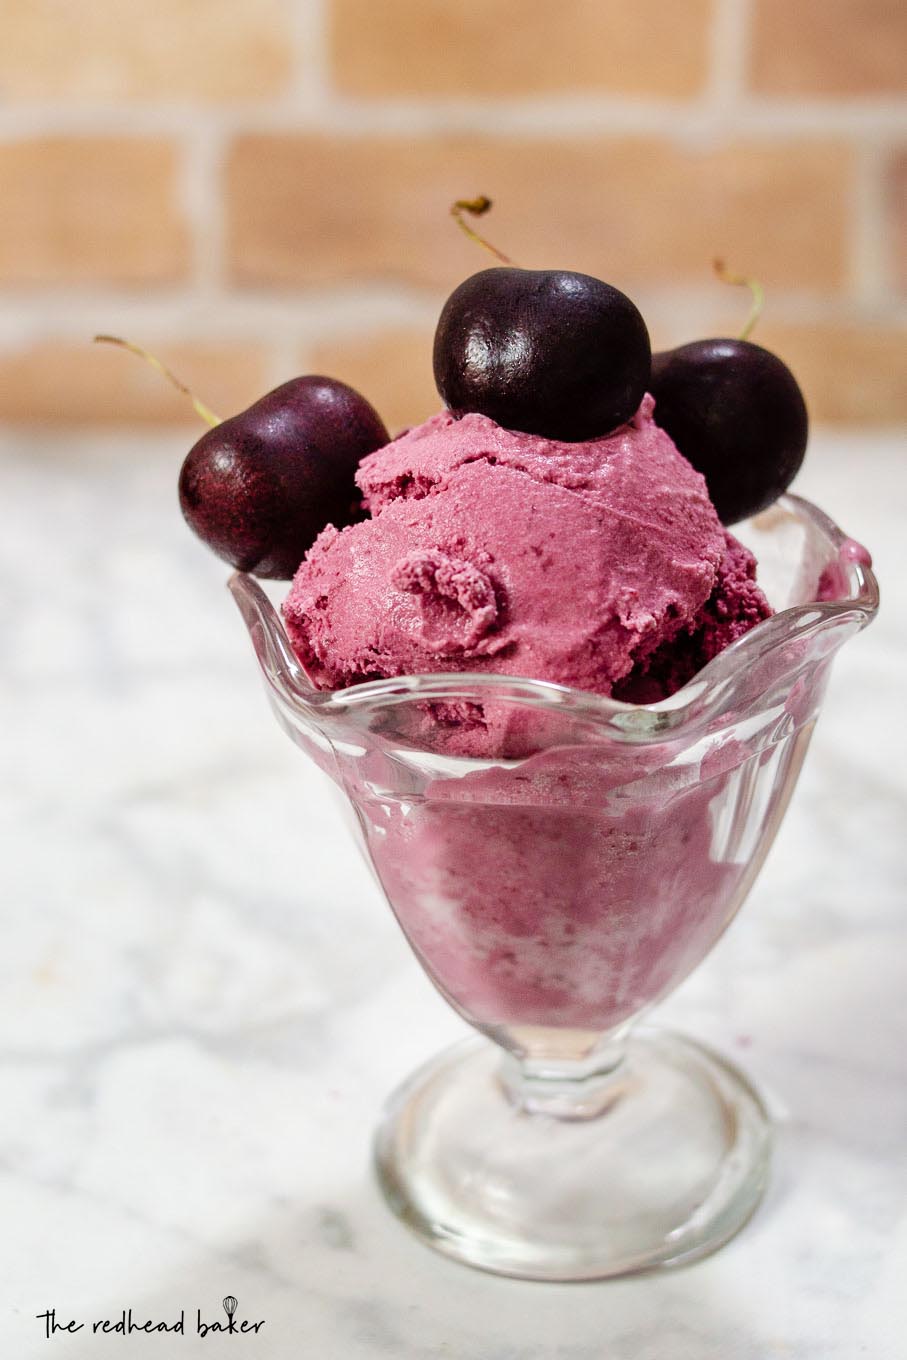 A dish of bourbon roasted cherry ice cream with three fresh cherries on top